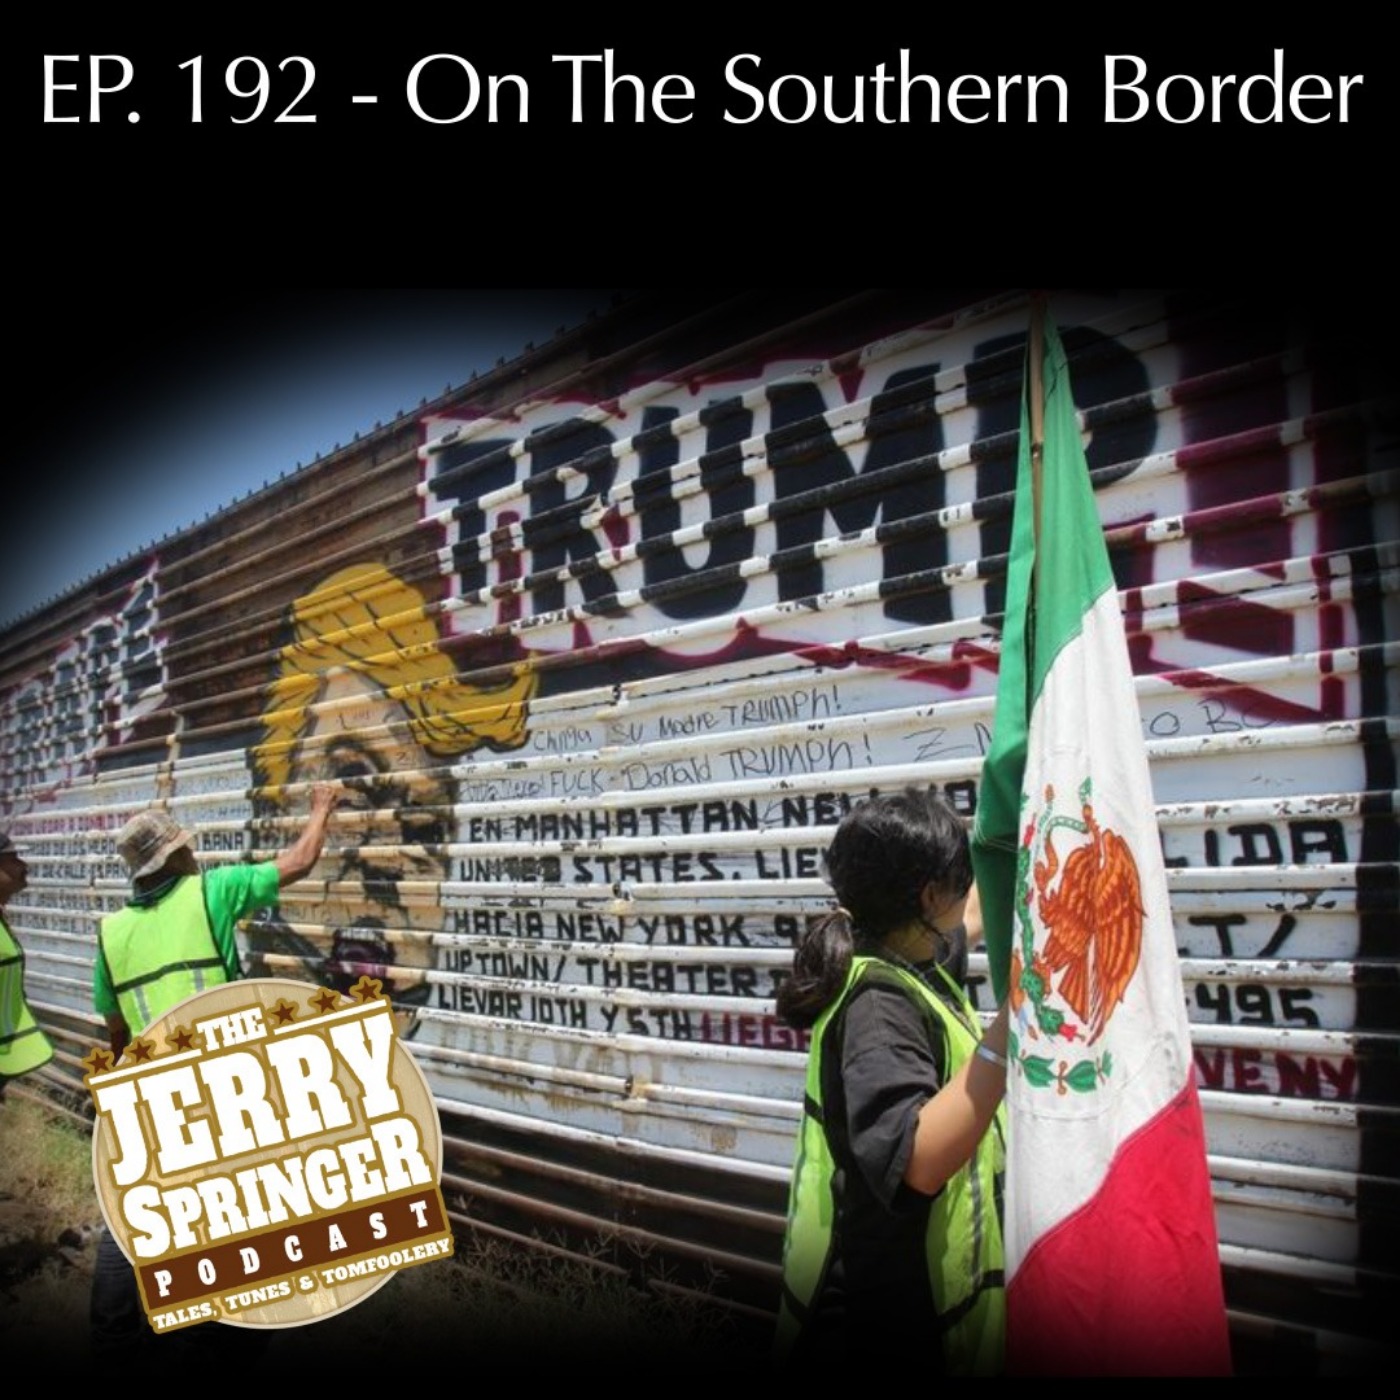 On The Southern Border - EP. 192